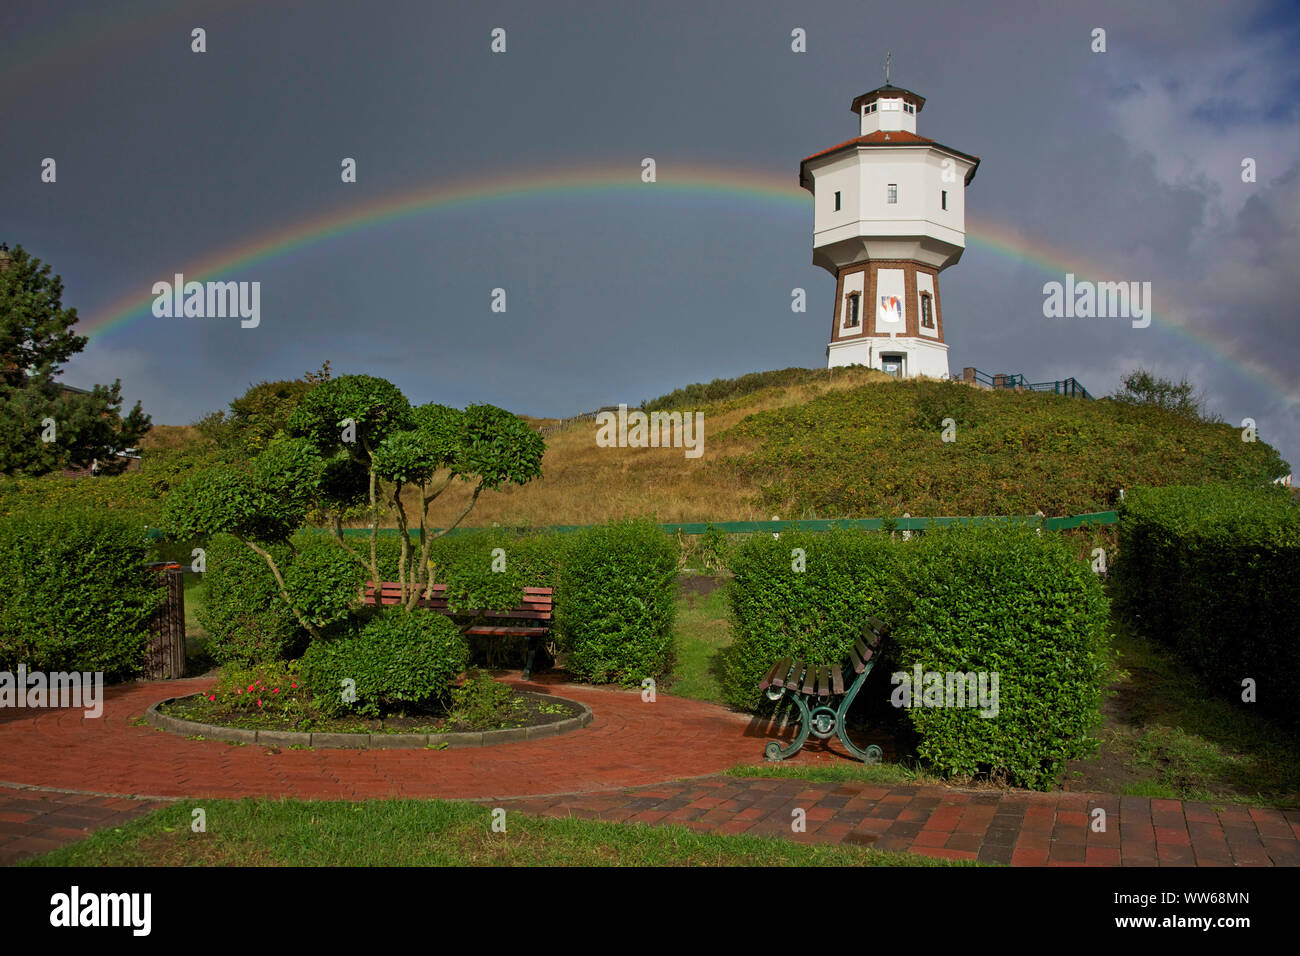 View from a small park on a rainbow behind the old water tower, the landmark of the island Langeoog. Stock Photo